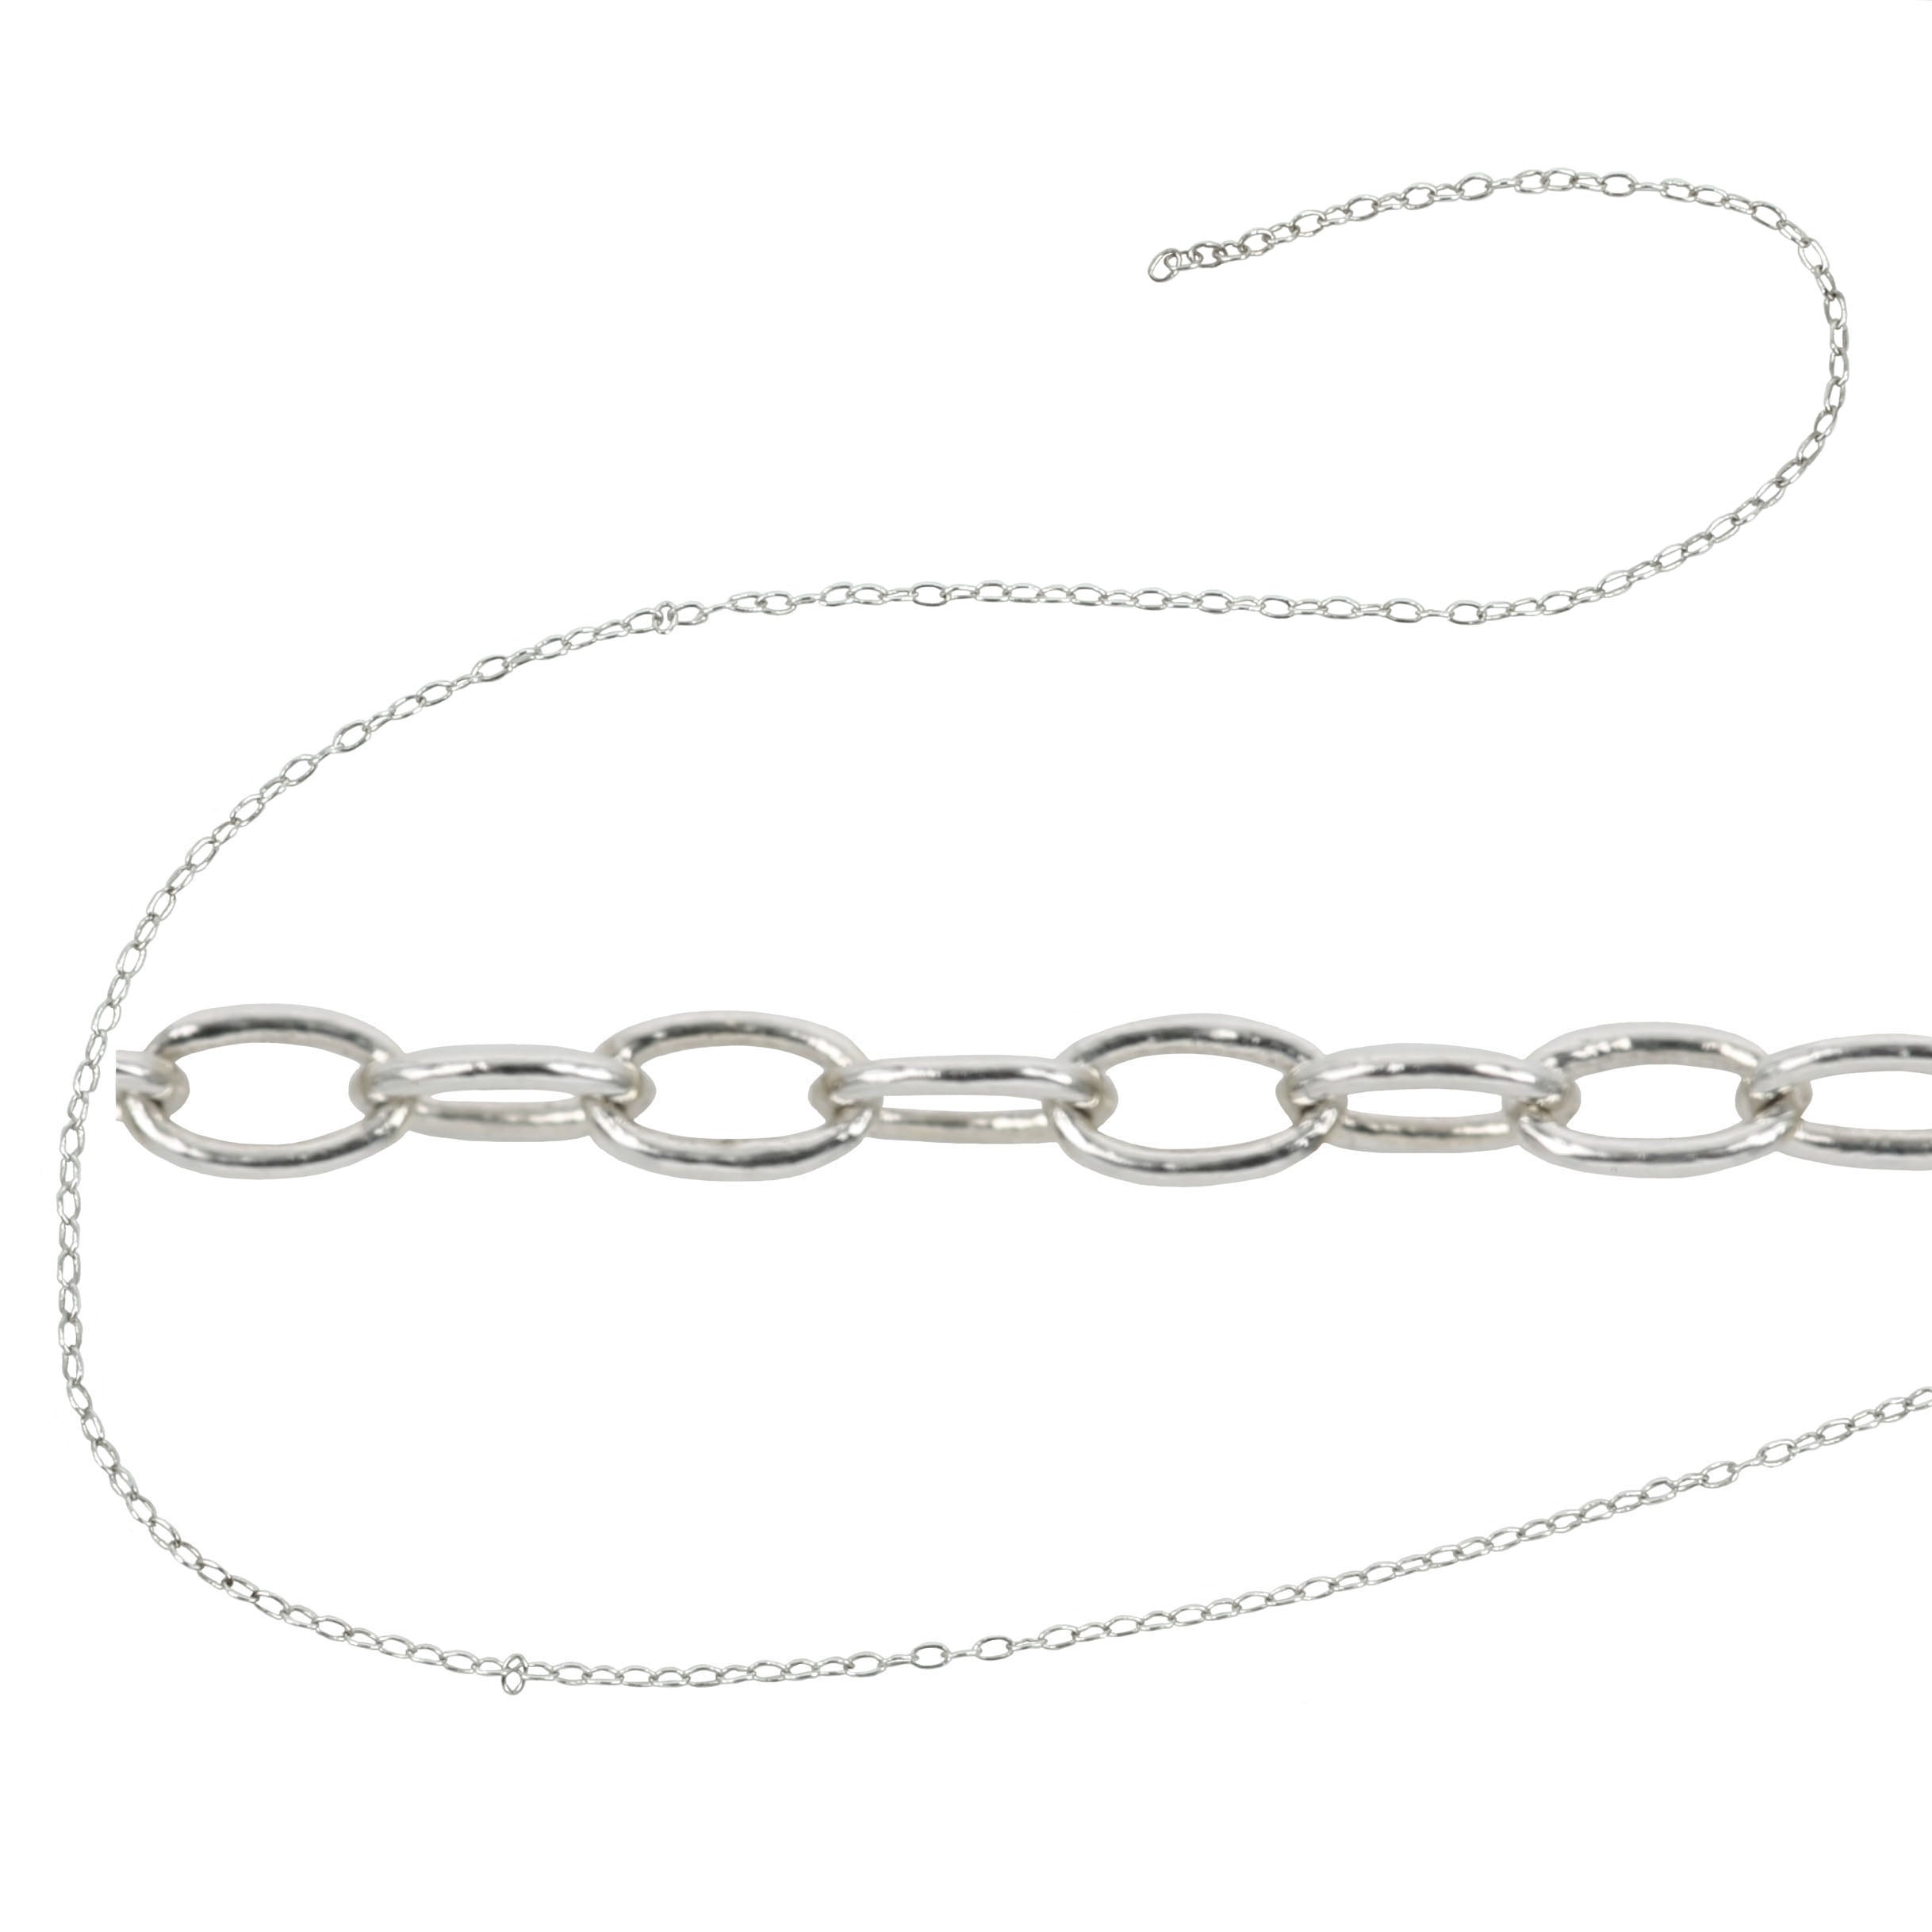 Cable Chain in Sterling Silver 1.2mm x 1.6mm Links